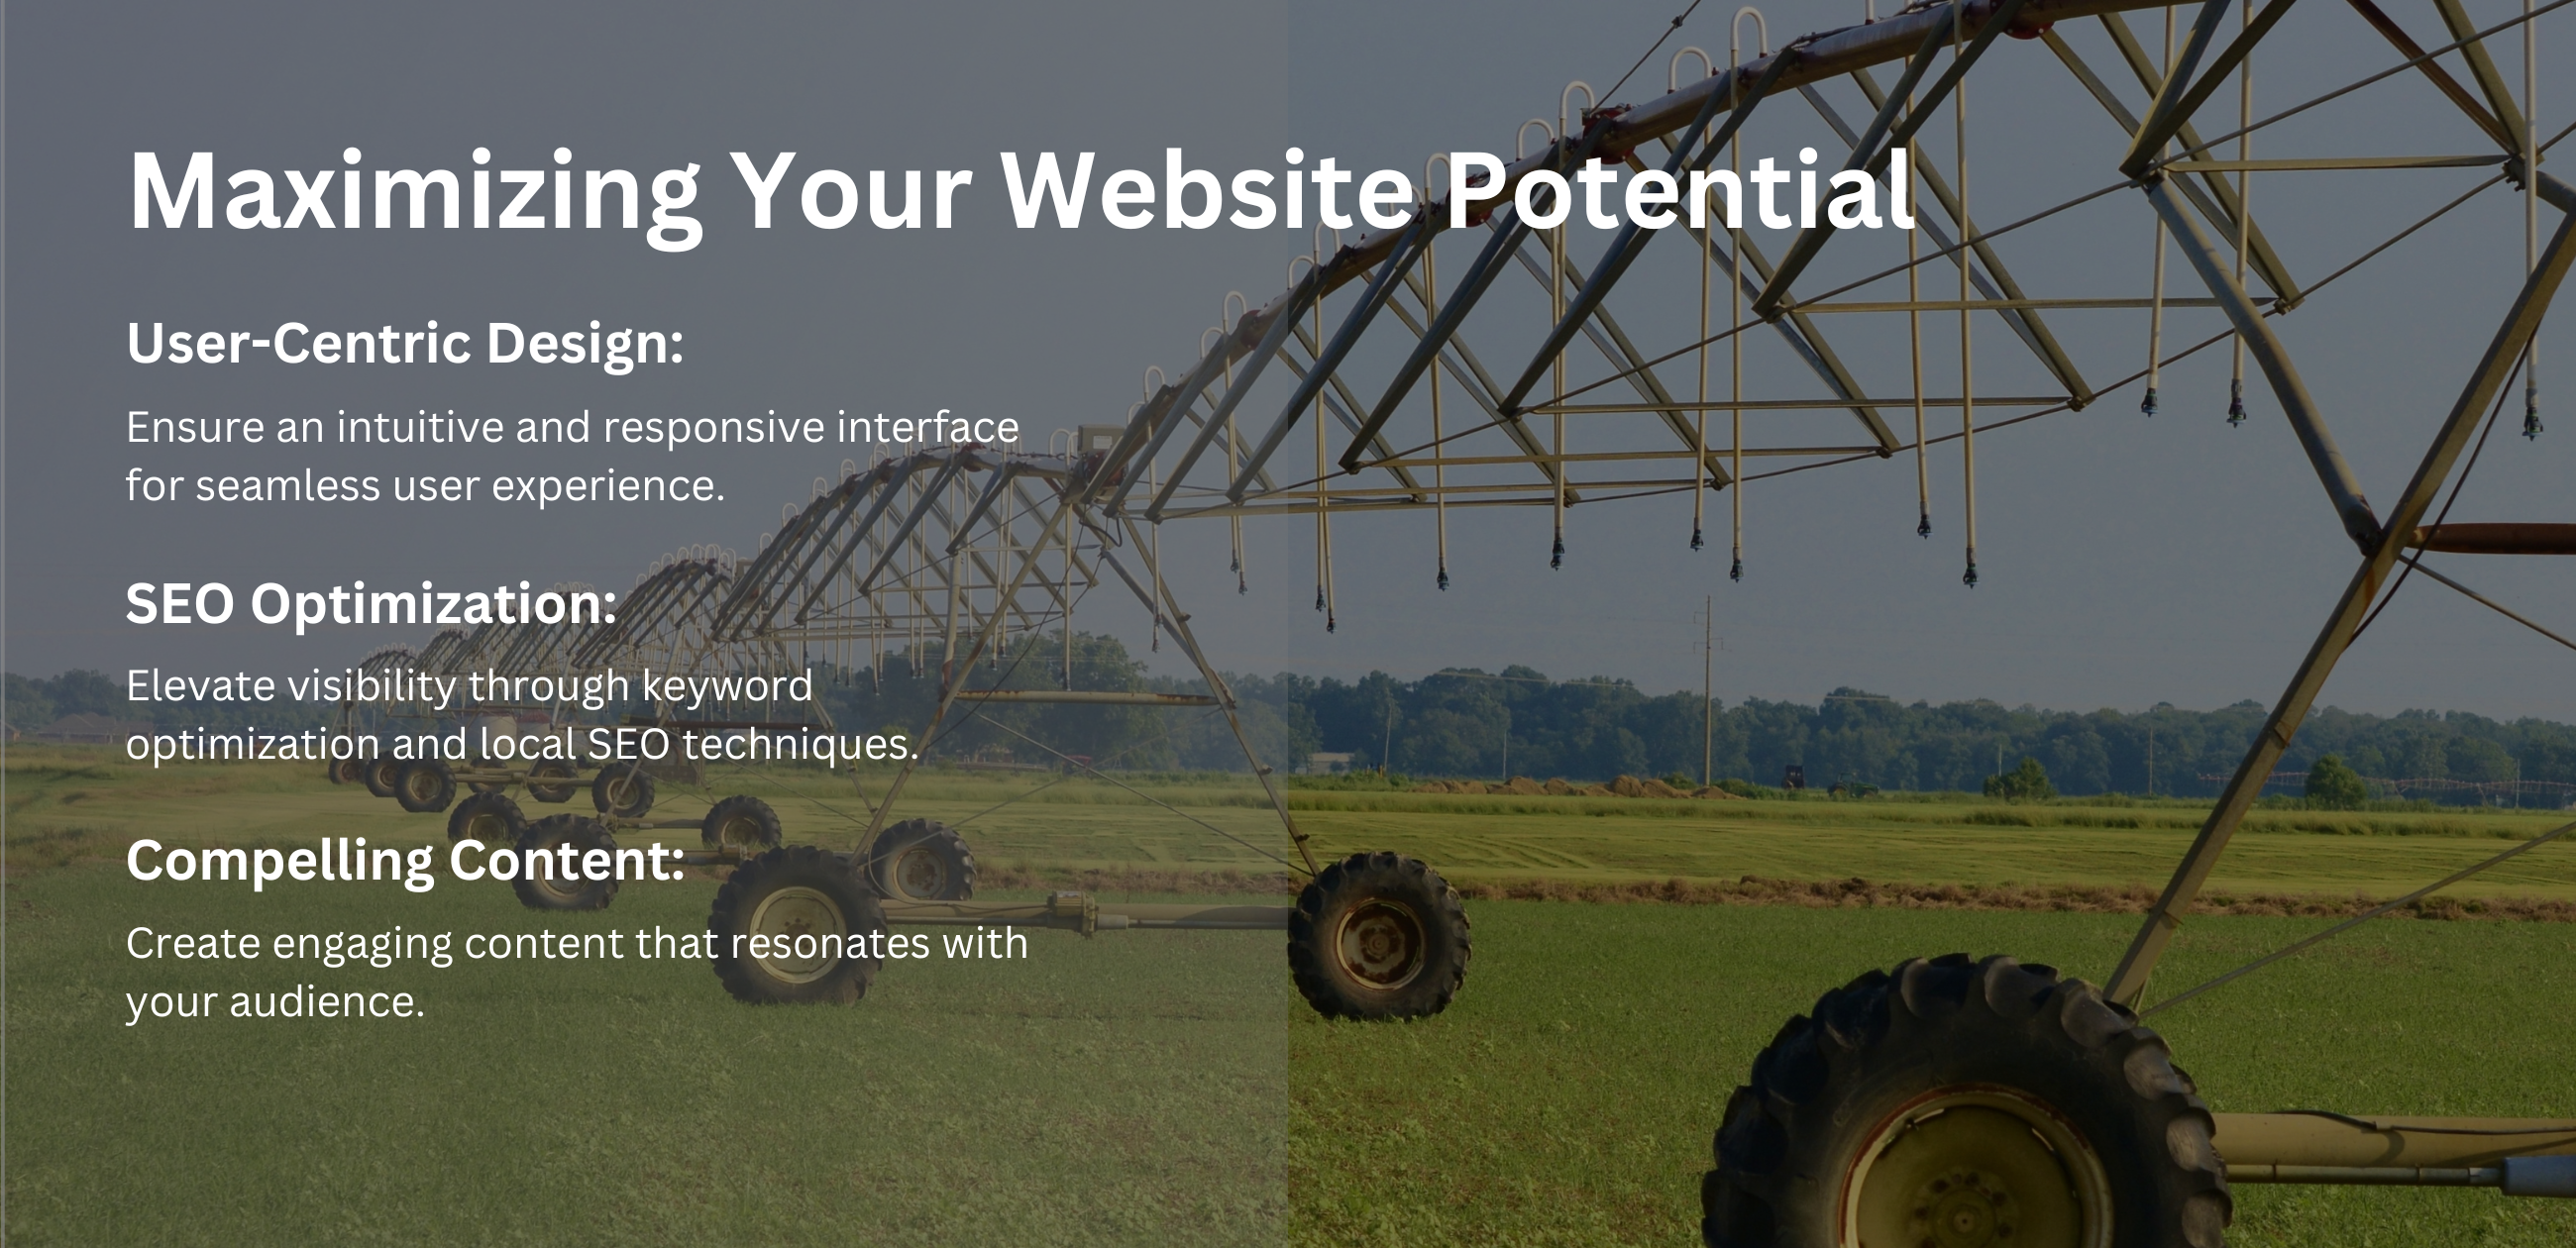 Maximizing Your Website Potential